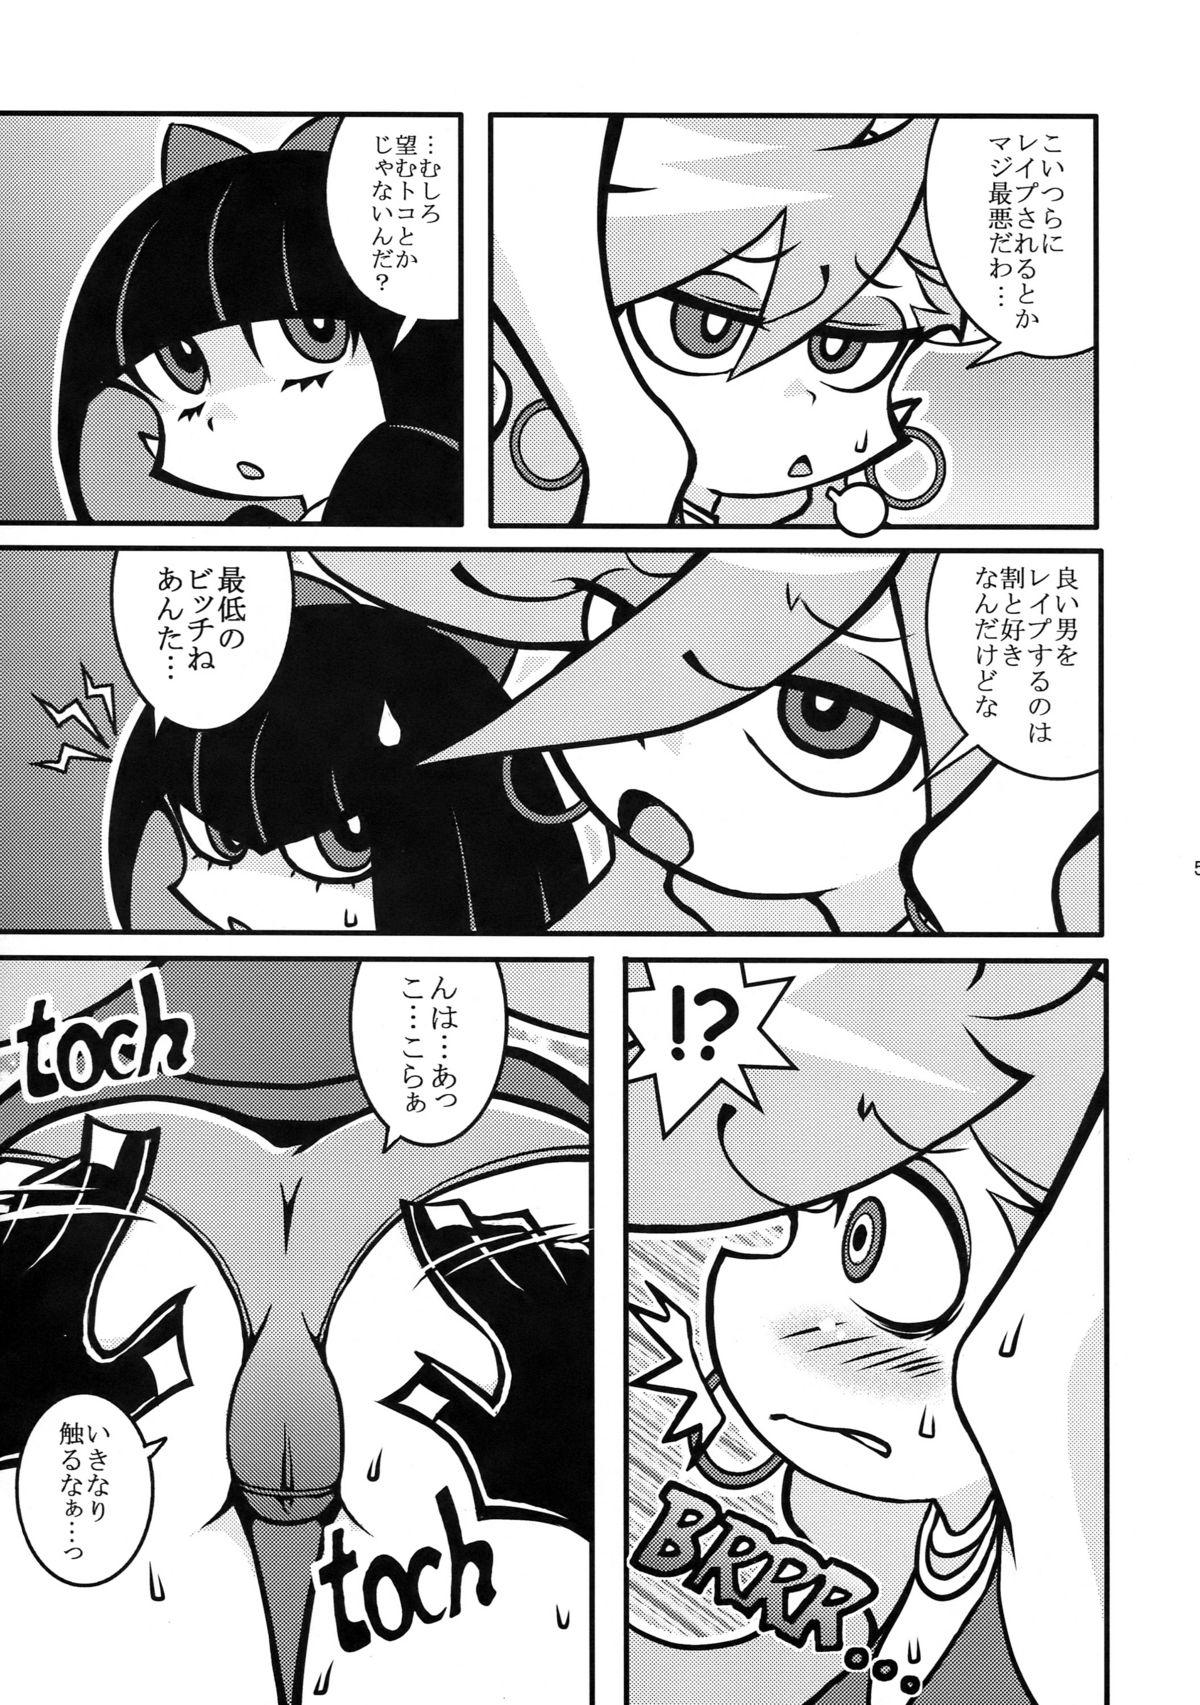 Livecams R18 - Panty and stocking with garterbelt Virgin - Page 5